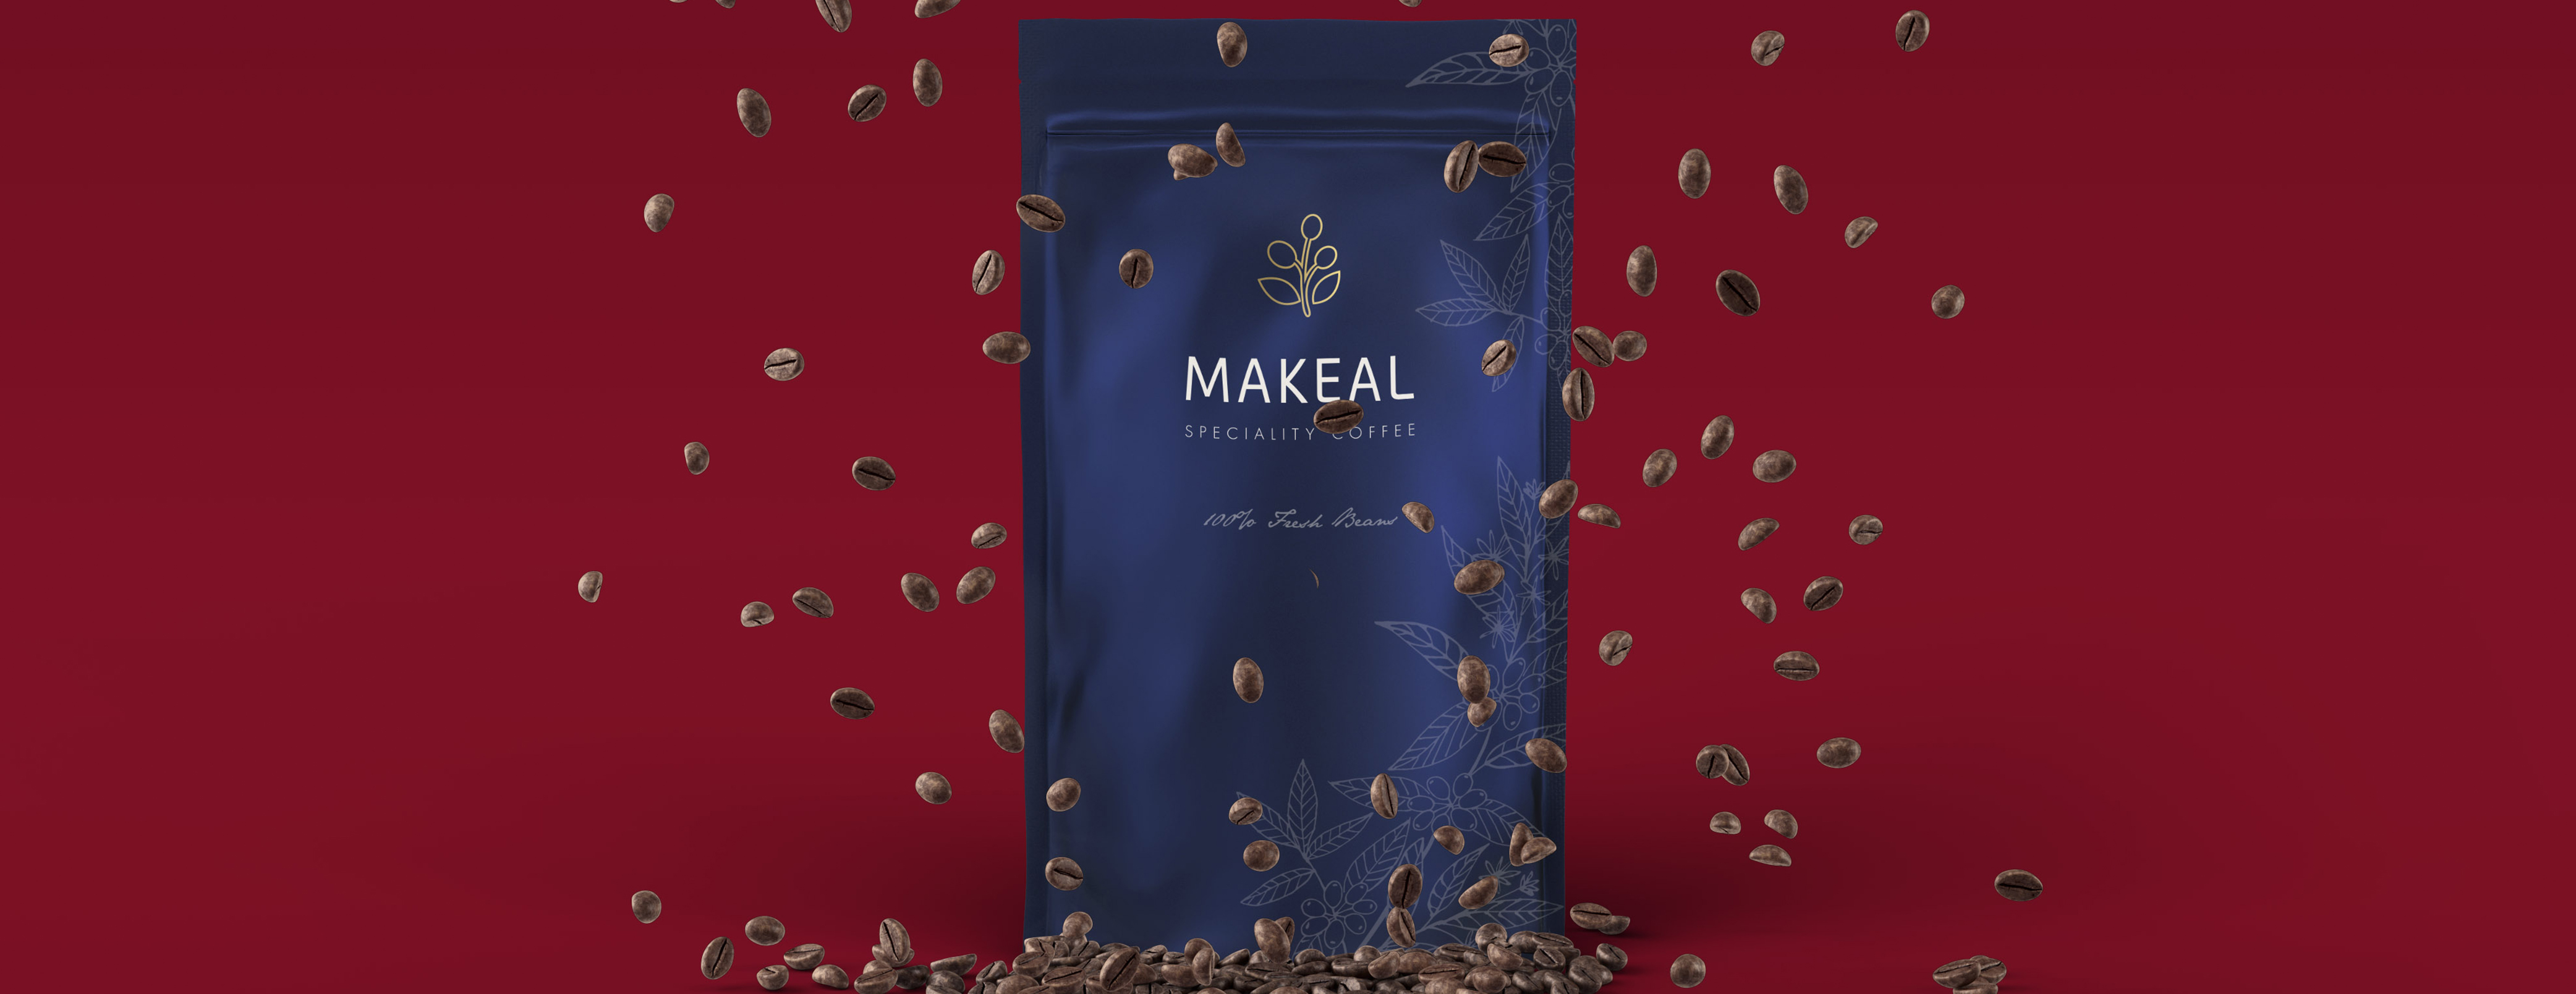 Makeal Coffee Brand Reveal